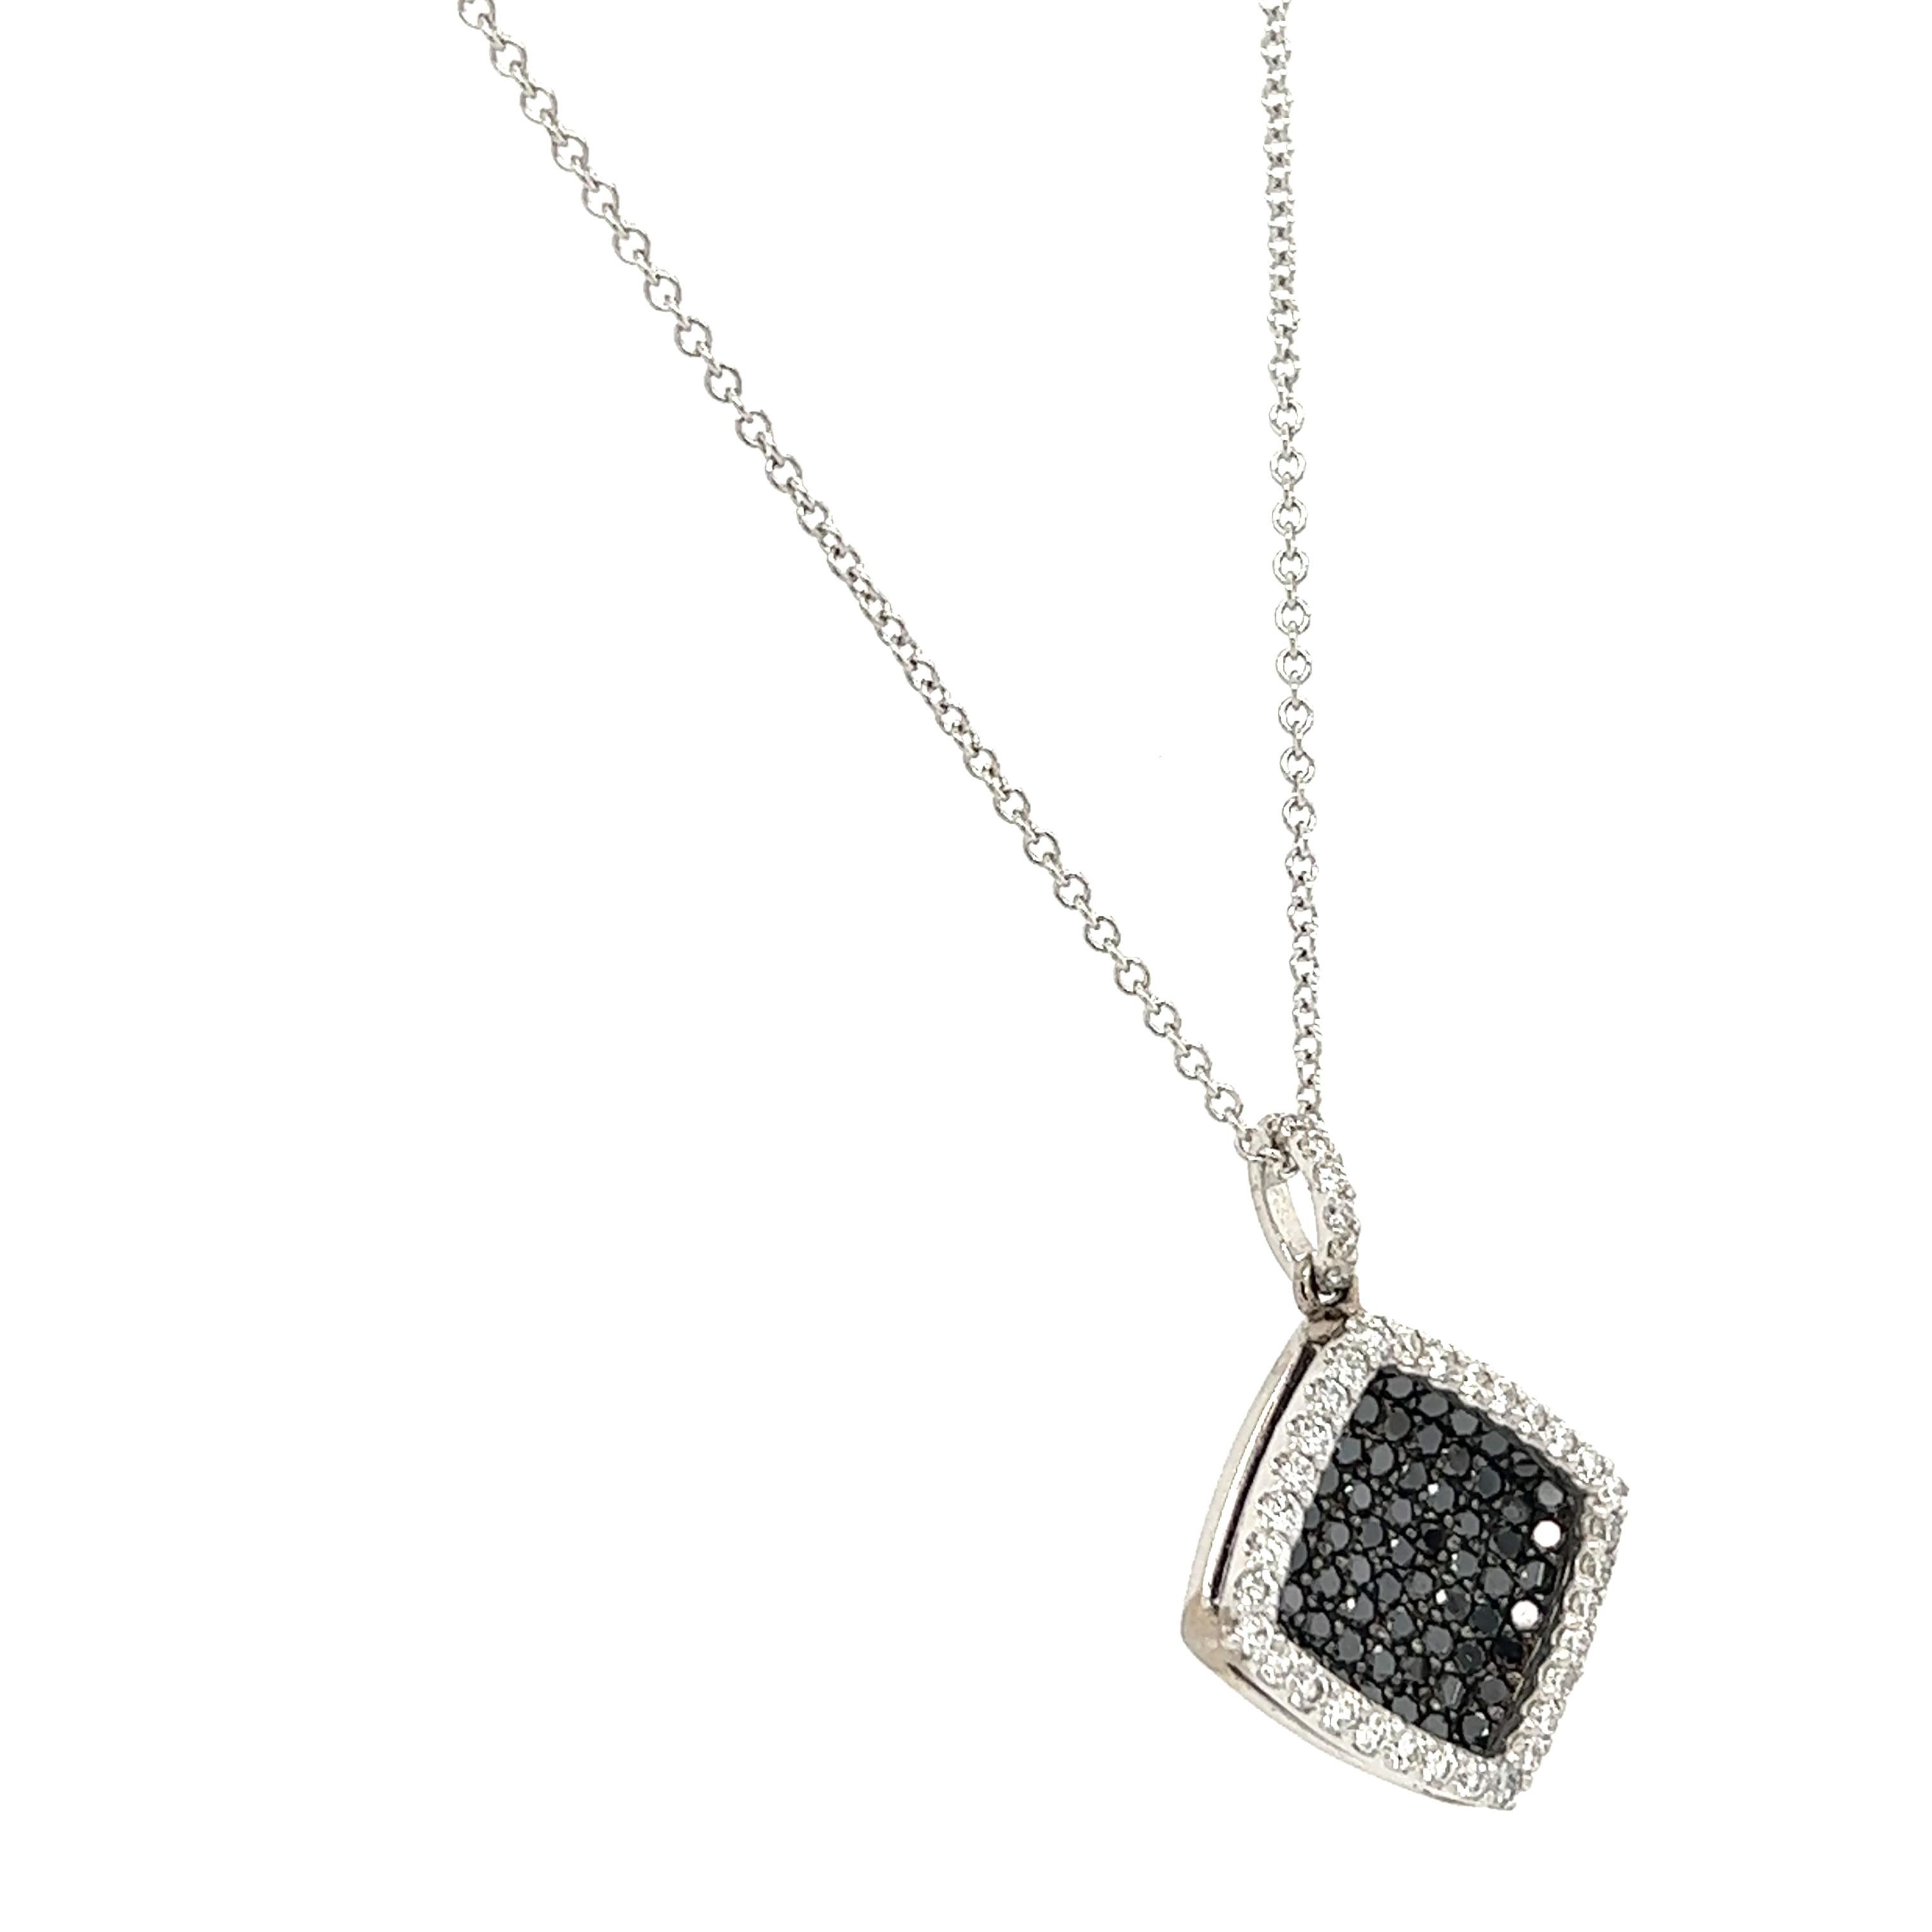 This necklace has Natural Black Diamonds that weigh 0.87 carats and Natural Round Cut Diamonds that weigh 0.40 carats. 
(Clarity: VS, Color: H) The total carat weight of the chain necklace is 1.27 carats.

The necklace is made in 14 Karat White Gold